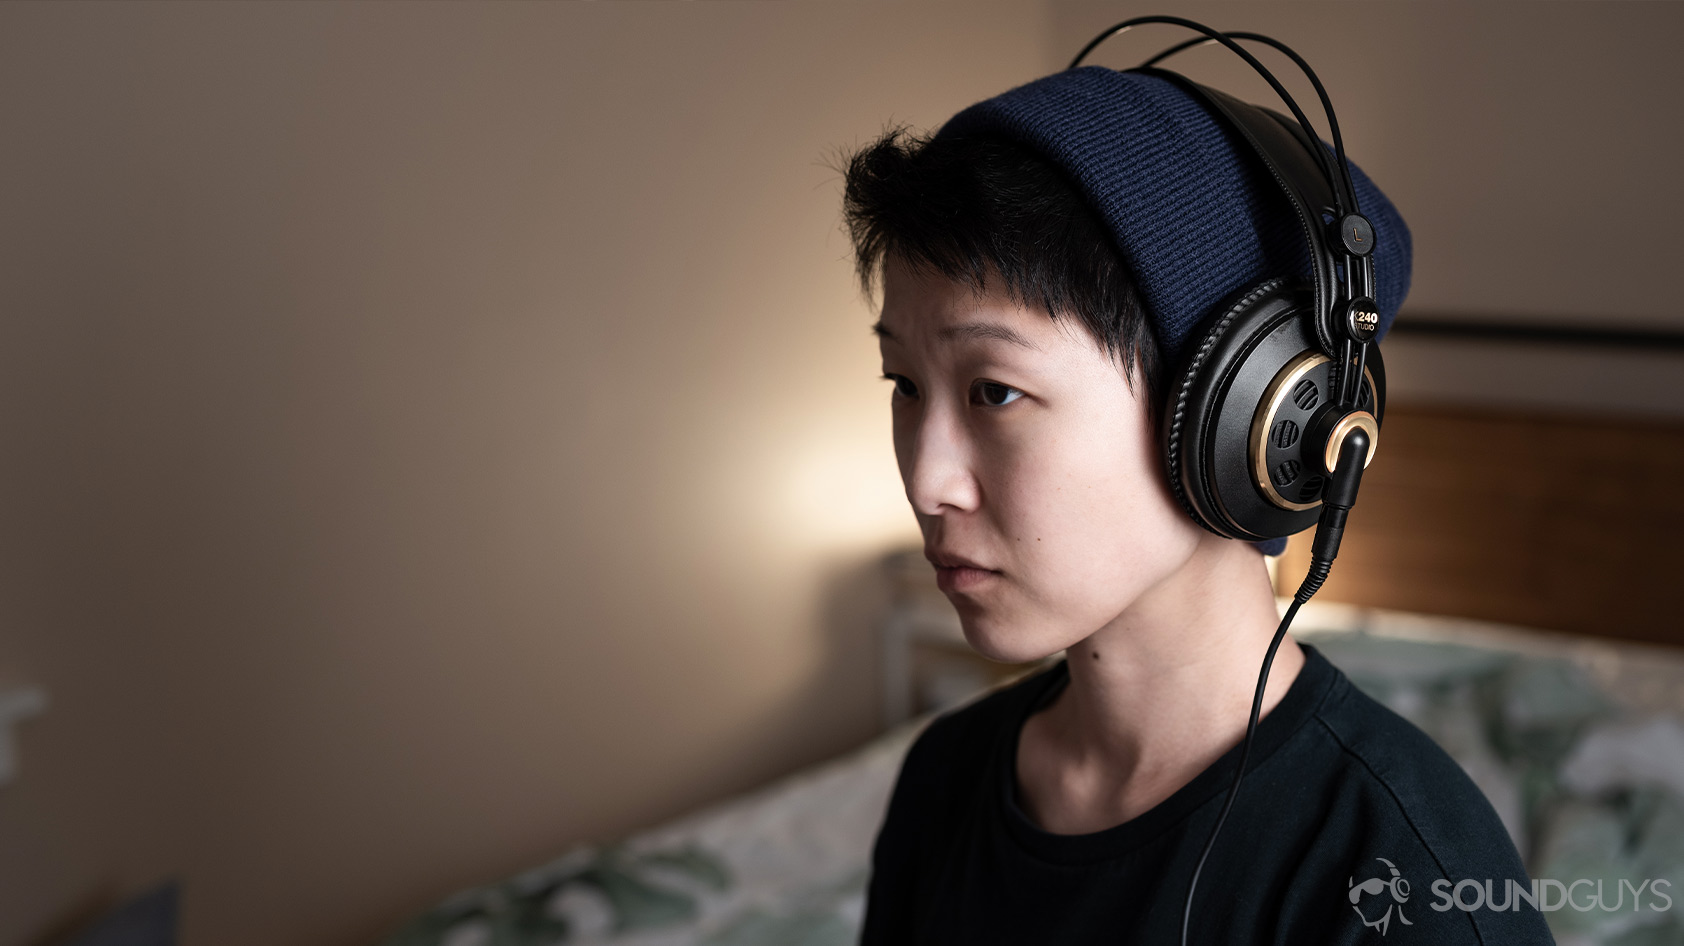 A photo of the AKG K240 Studio semi-open headphones being worn by a woman angled slightly away from the camera.